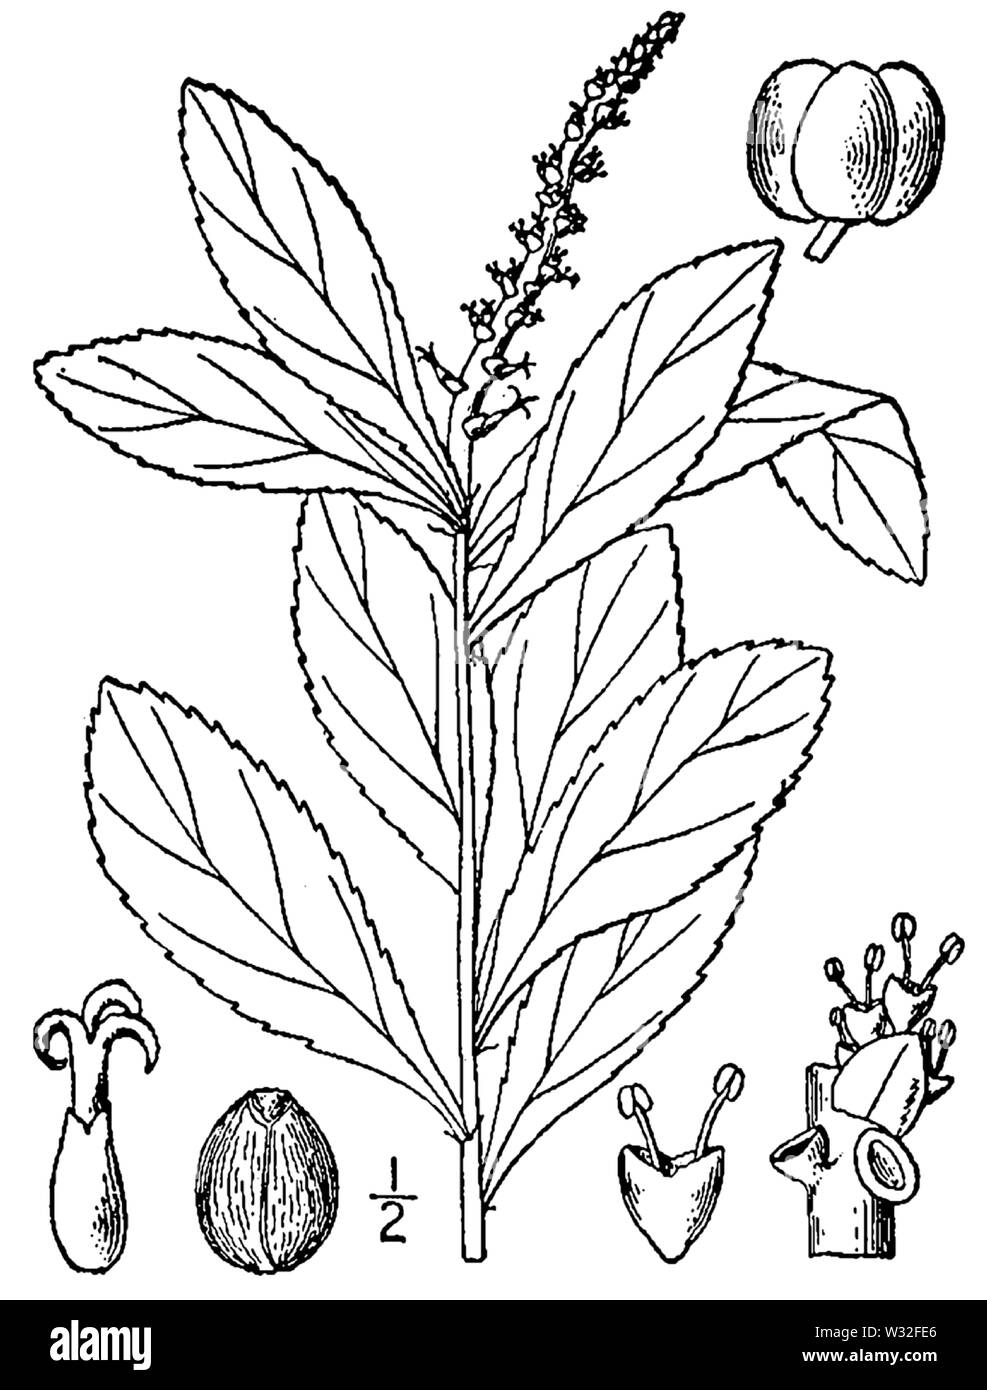 Illustration of Stillingia sylvatica from Britton & Brown's Illustrated flora of the northern states and Canada. Vol. 2:461. Stock Photo